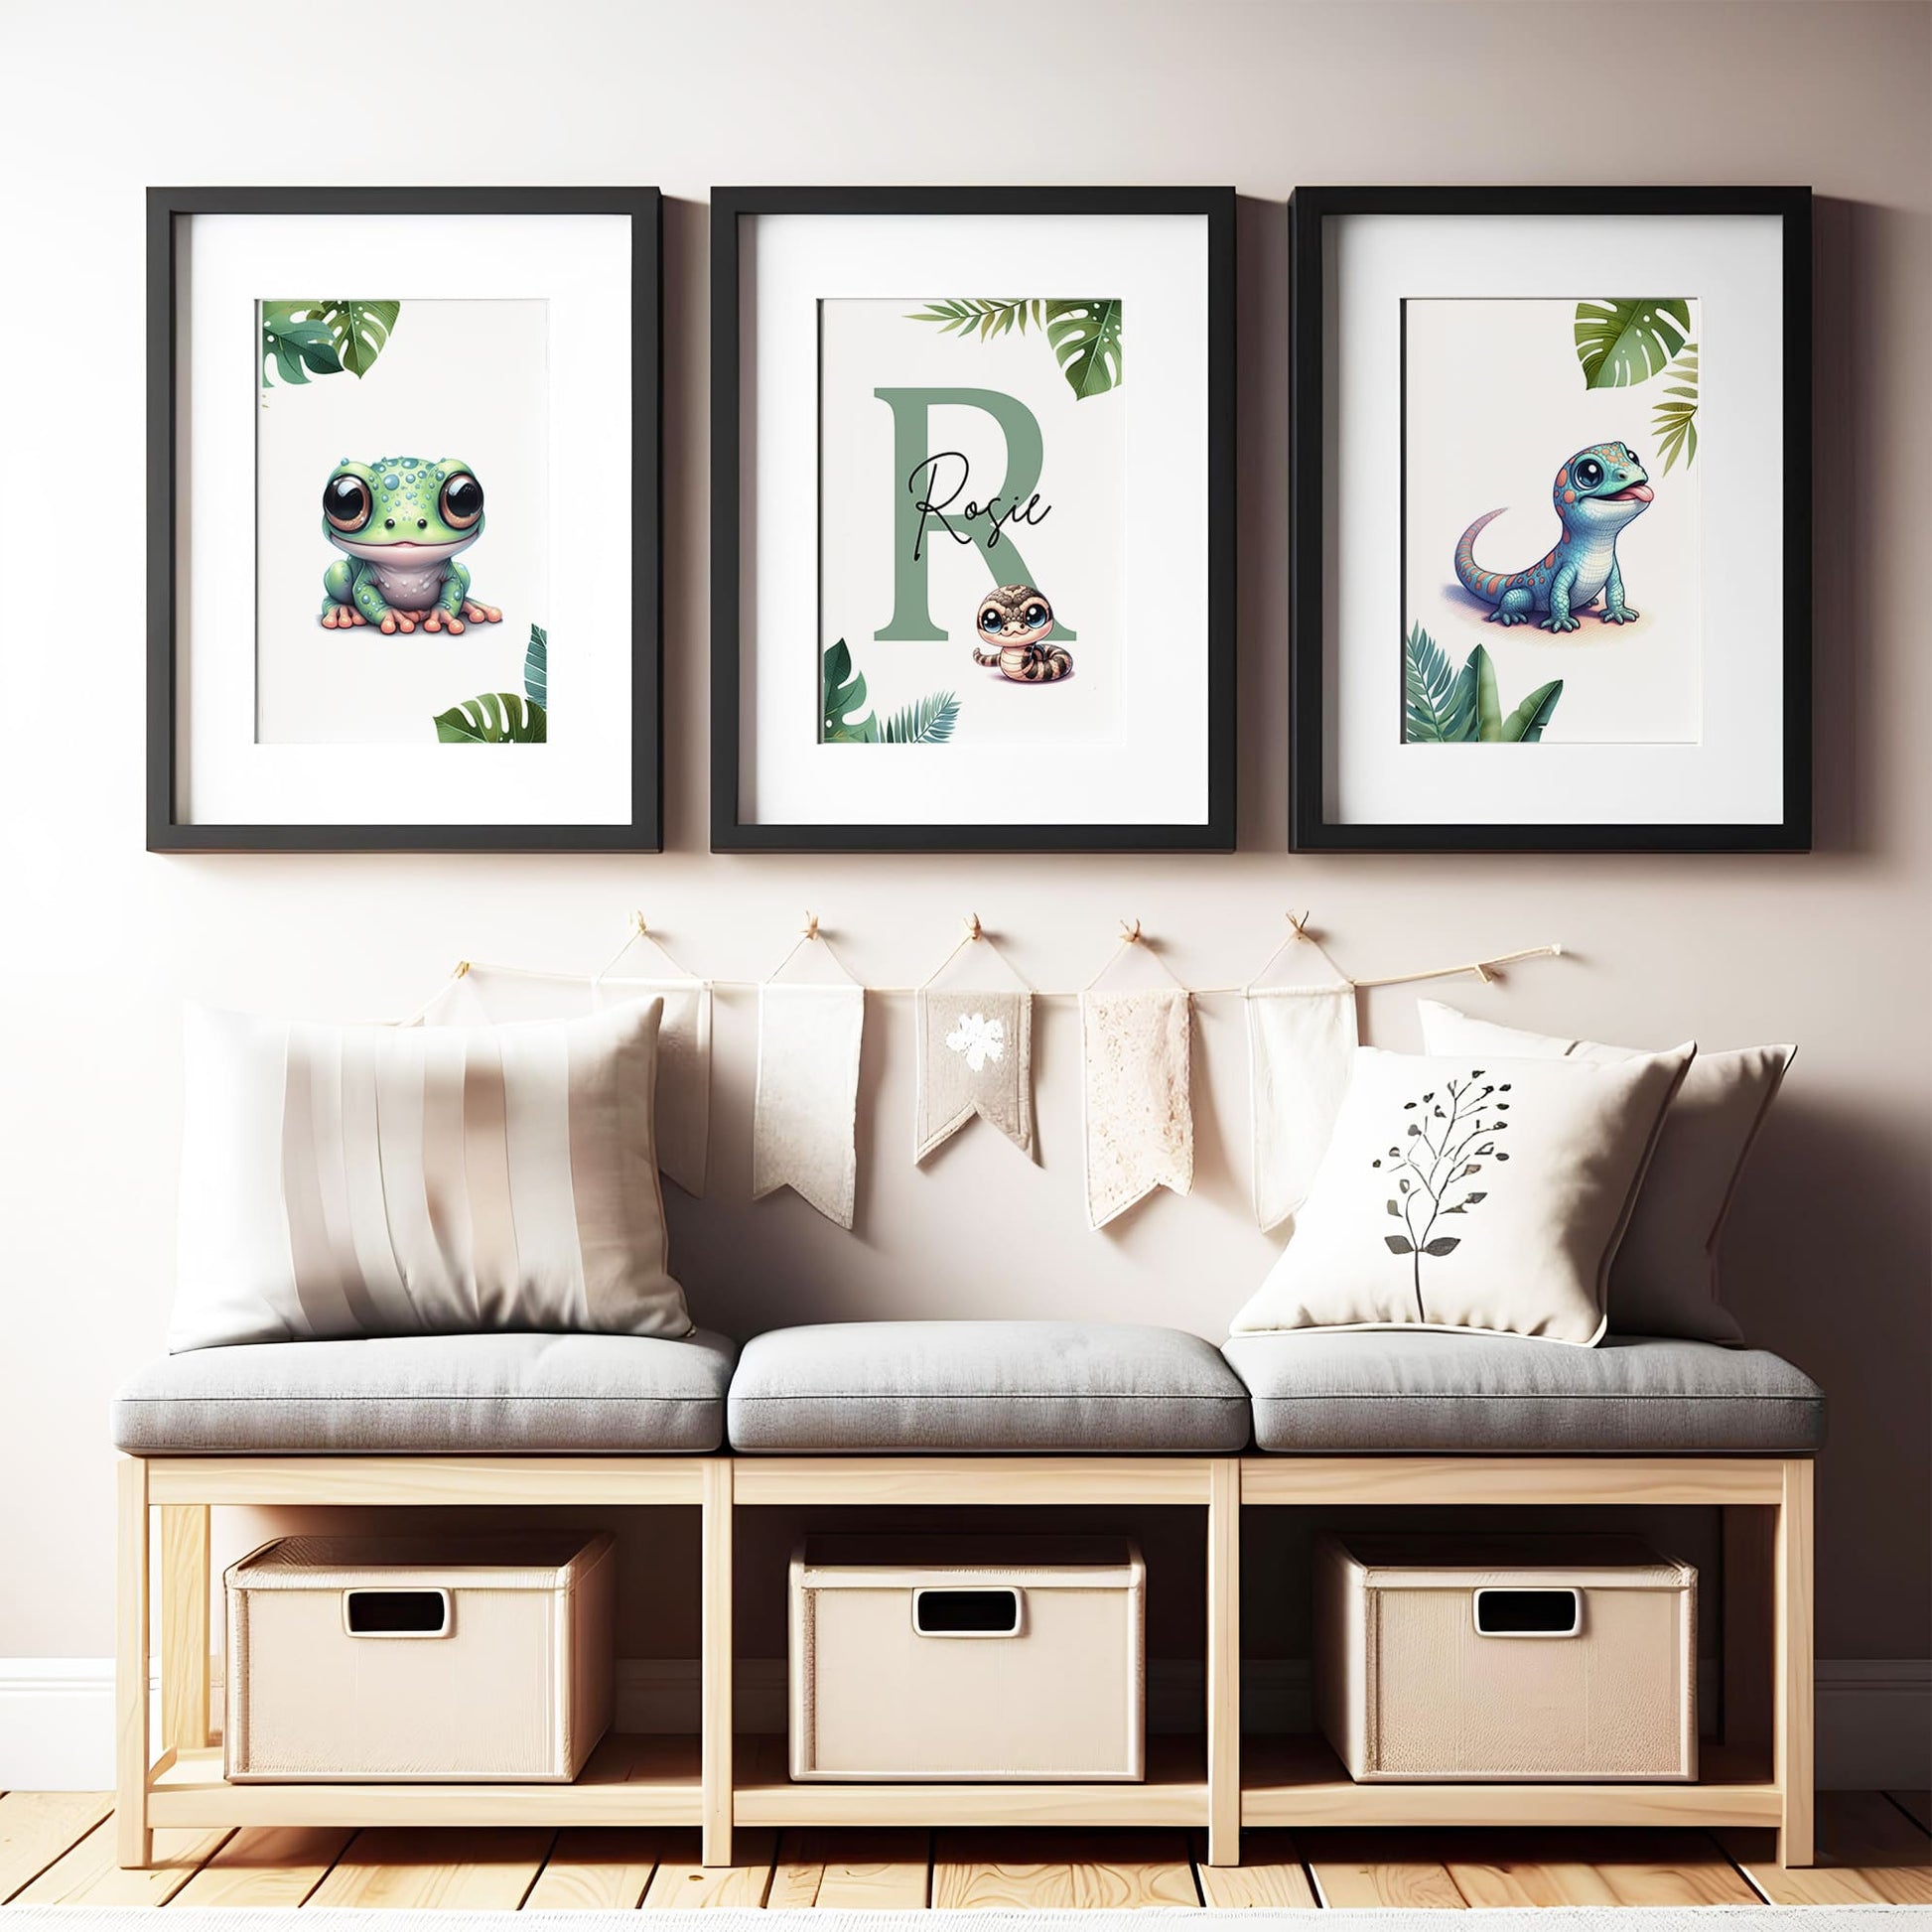 Set of three A4 prints featuring reptiles/amphibians - tree frog, lizard, and snake. The animals are depicted in a cartoony, bright style resembling coloured pencil drawings. Jungle-style leaves decorate the edges of the prints. The middle print features a smaller animal than the others, with a large initial letter in the background. A personalised name in black overlays the initial letter.